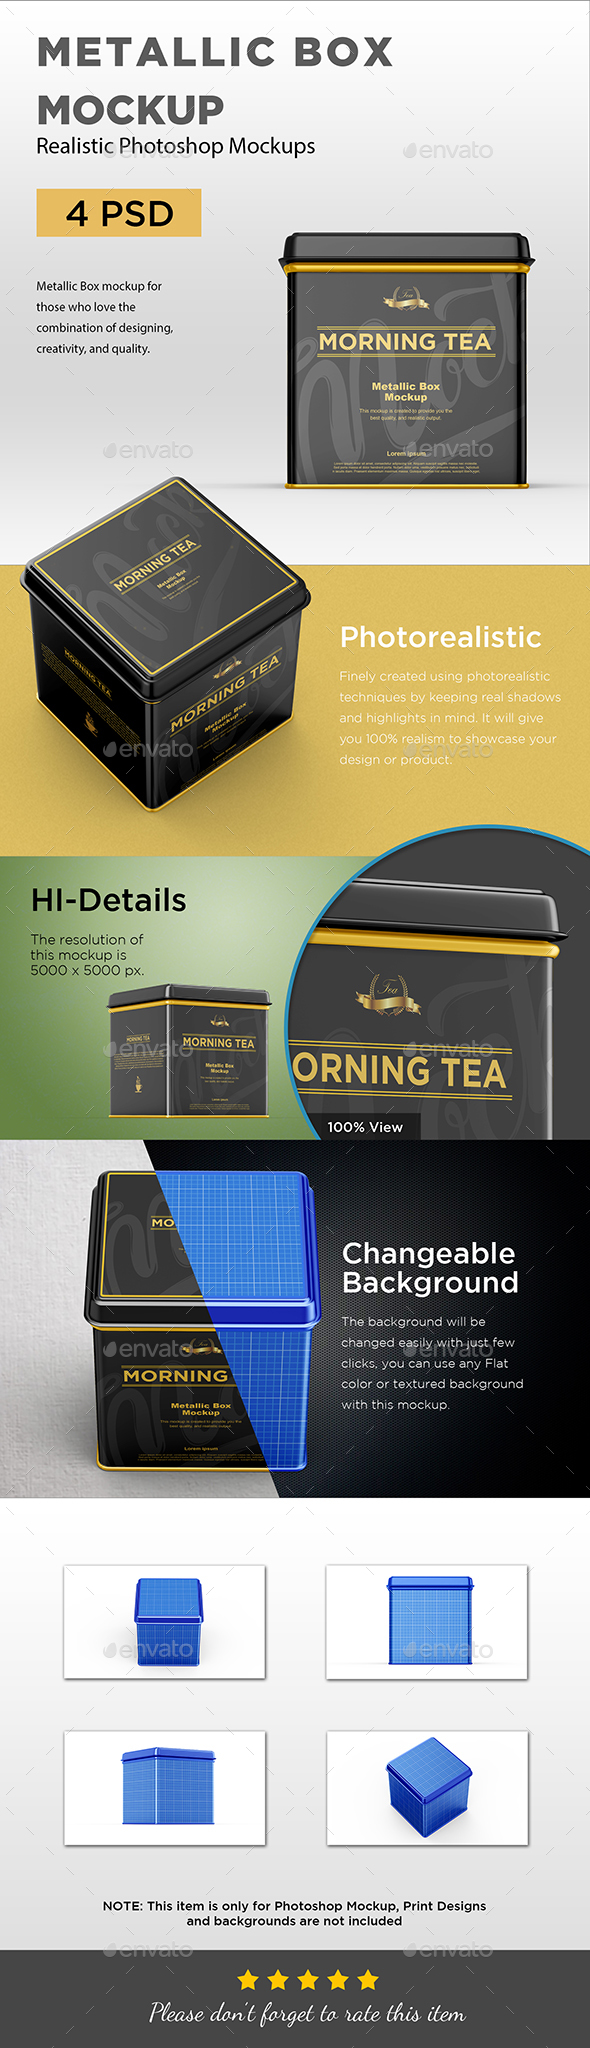 Download Drop Box Mockup Graphics Designs Templates From Graphicriver